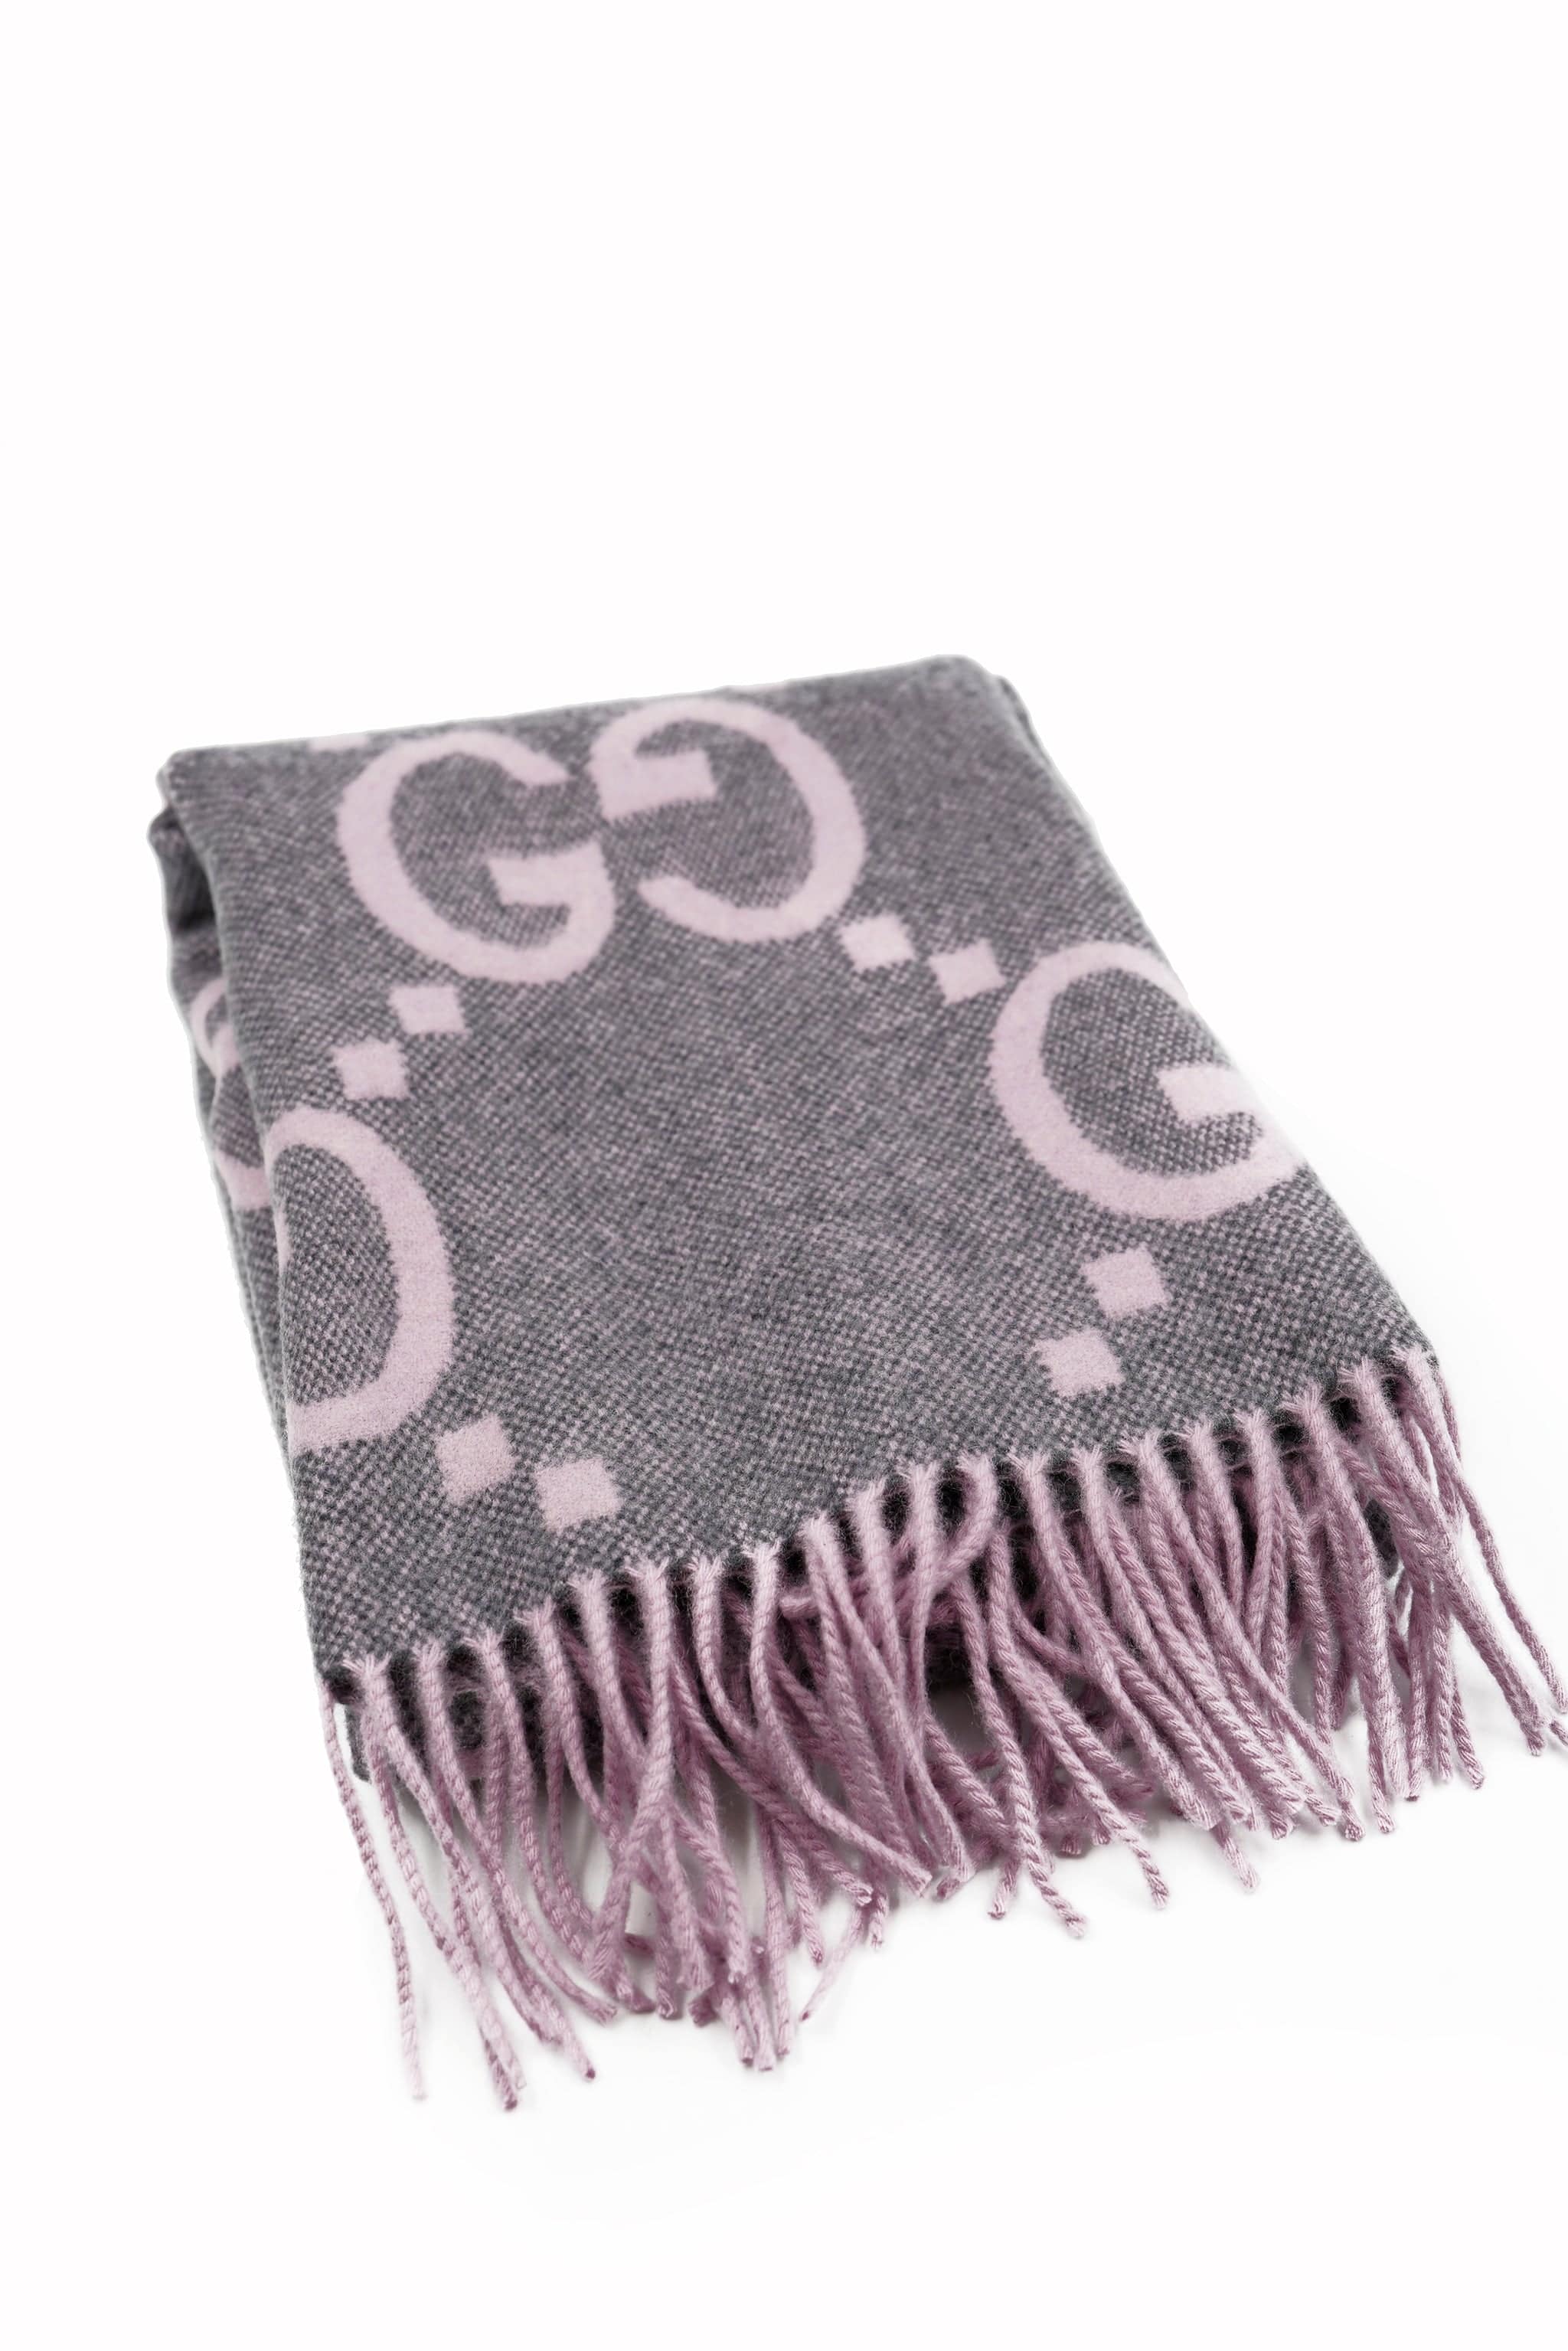 Louis Vuitton M77637 The Ultimate Scarf , Grey, One Size